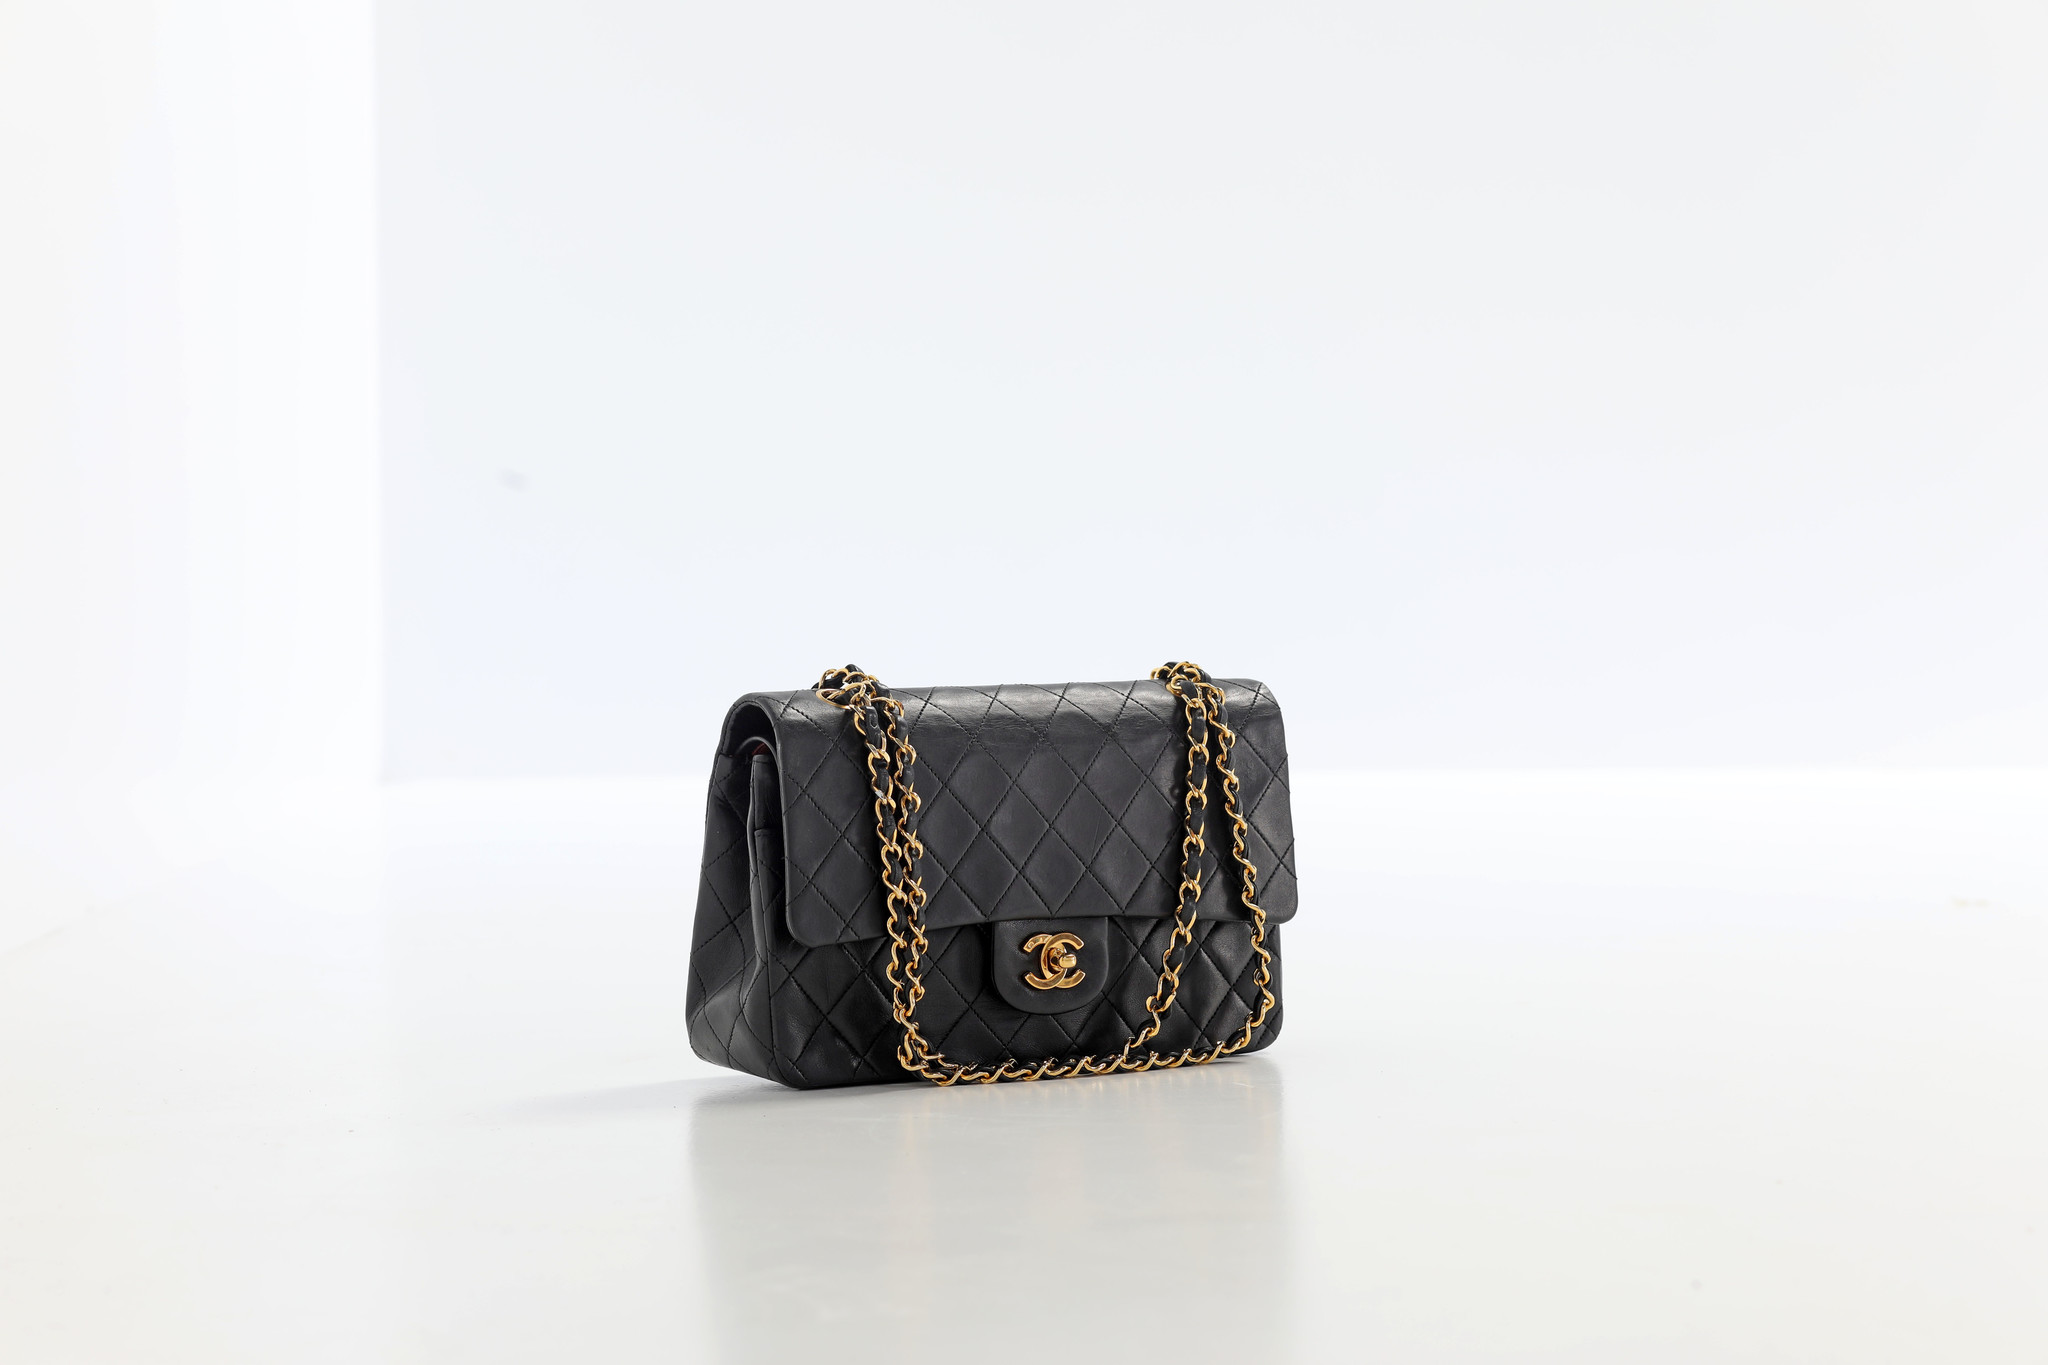 Chanel Classic double flap bag - THE HOUSE OF WAUW